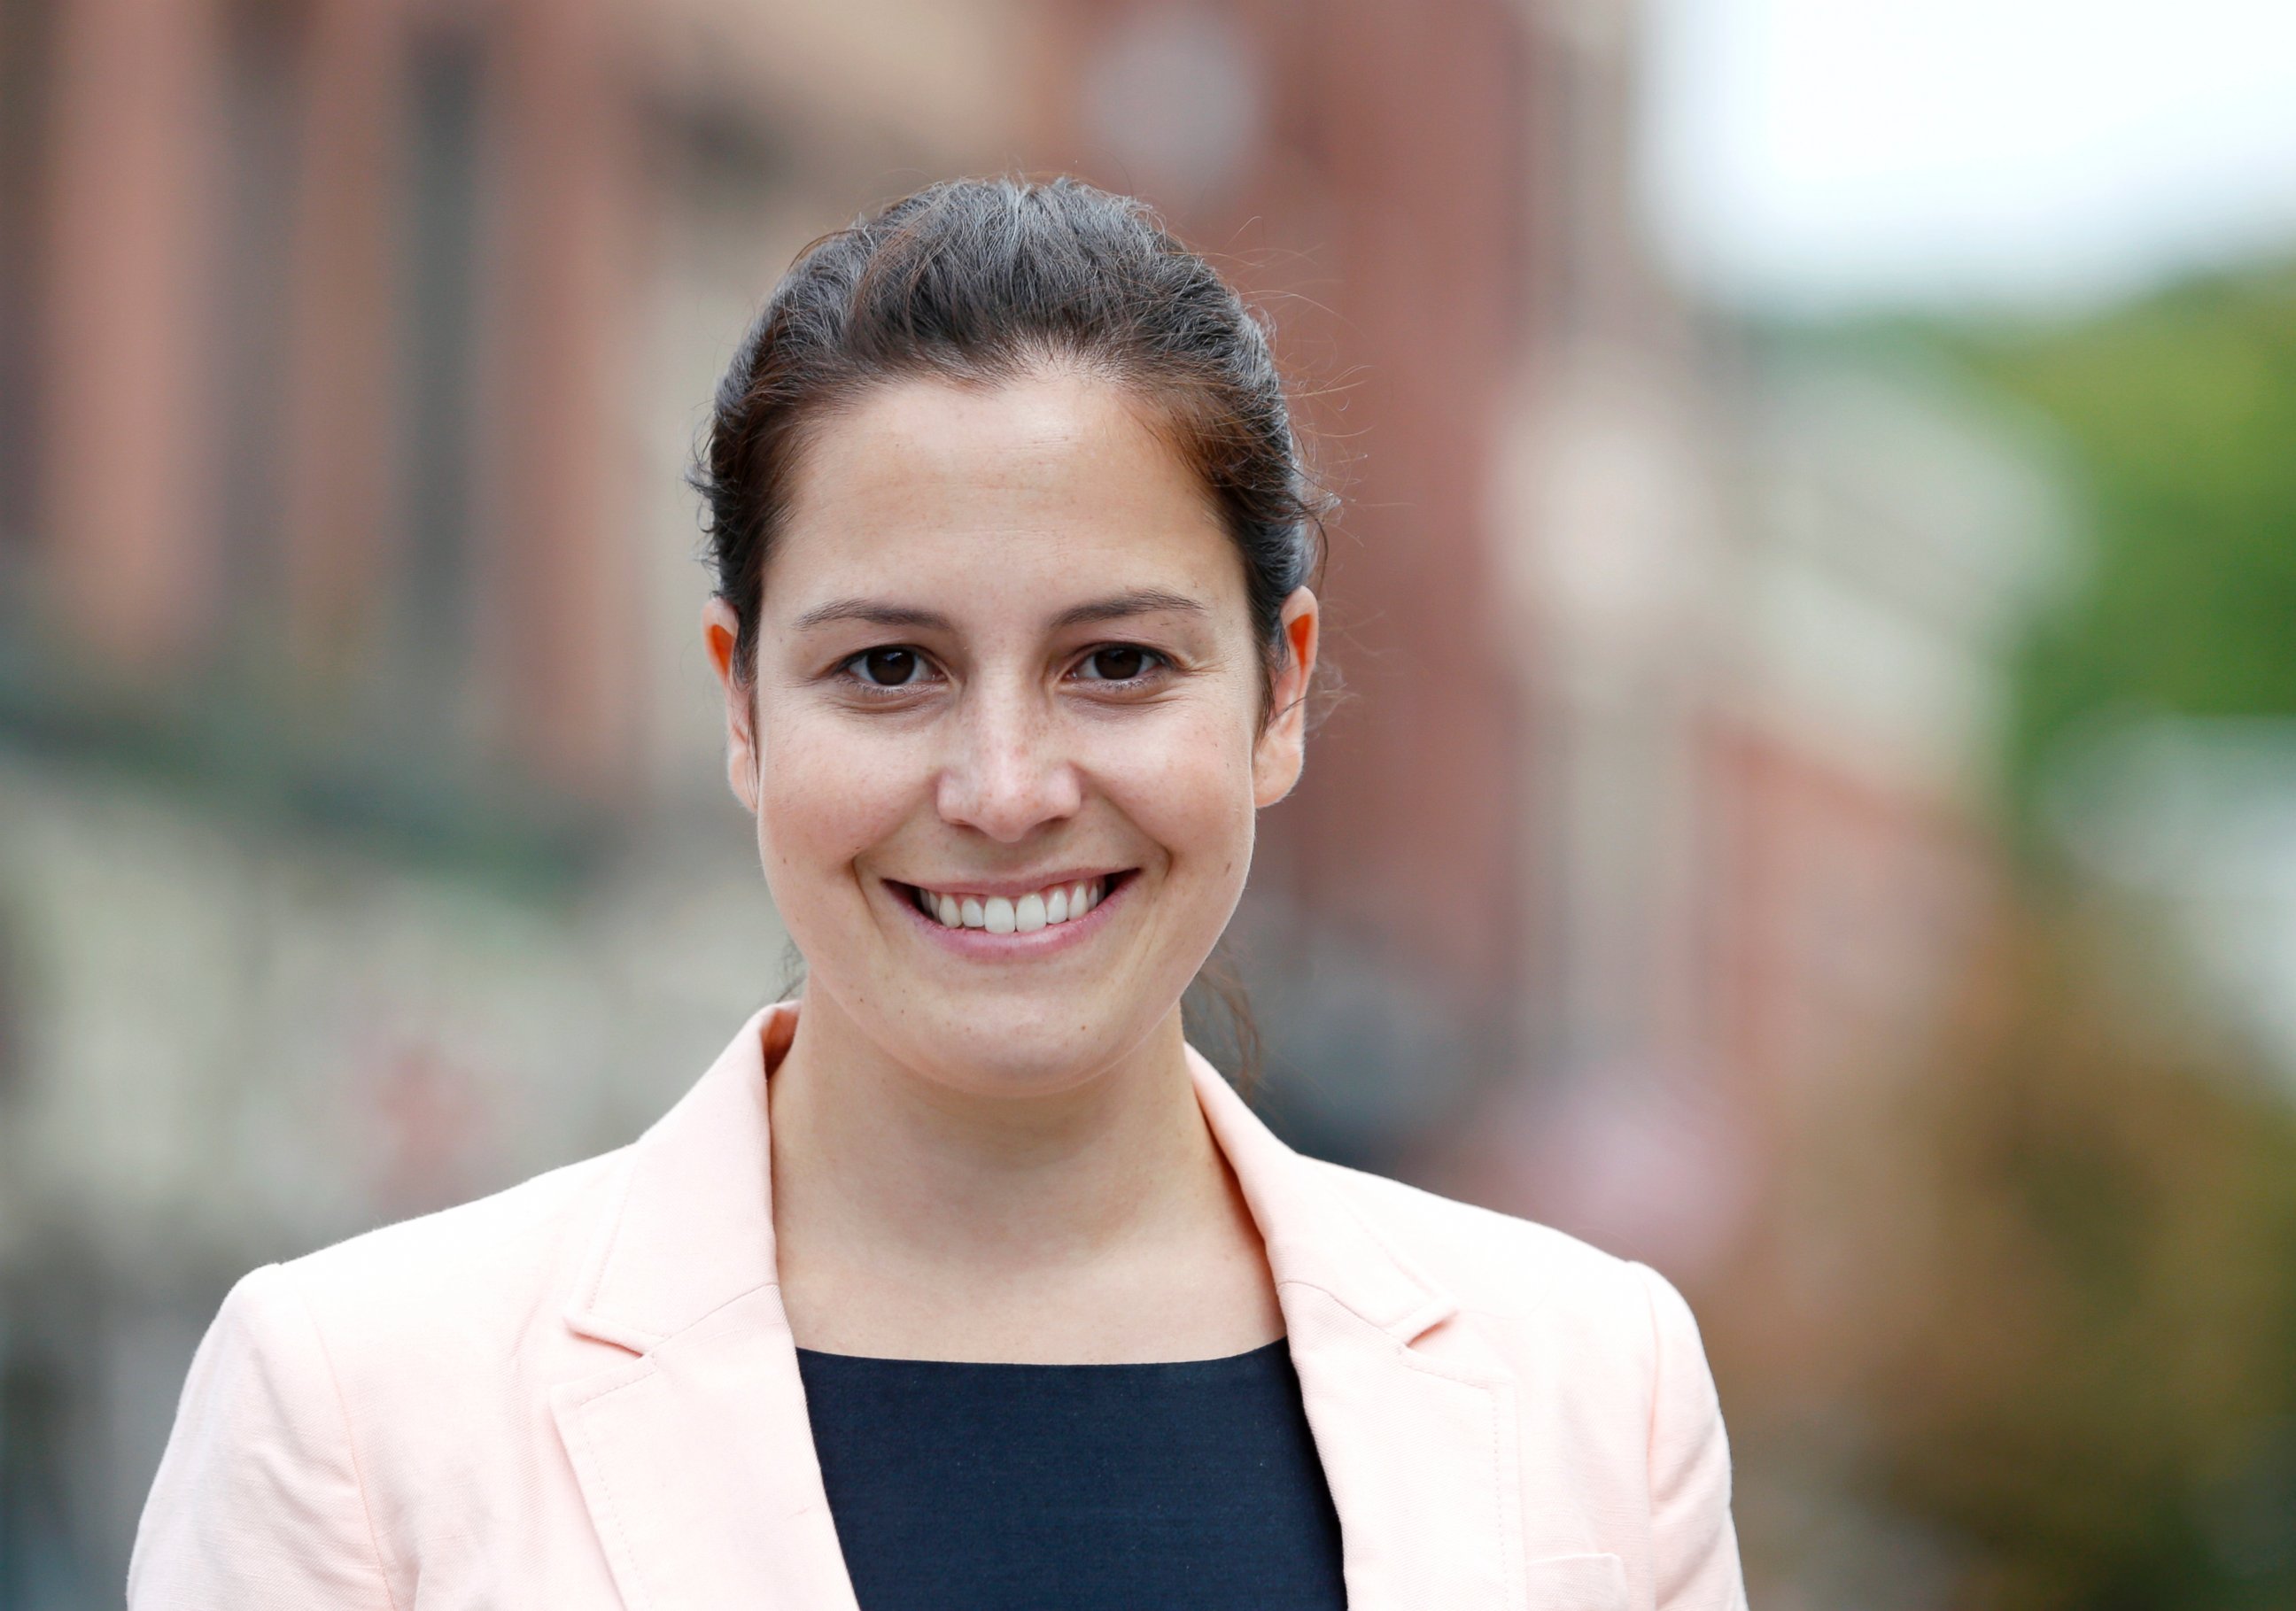 PHOTO: Republican Congressional candidate Elise Stefanik poses, Aug. 27, 2014, in Ballston Spa, N.Y.